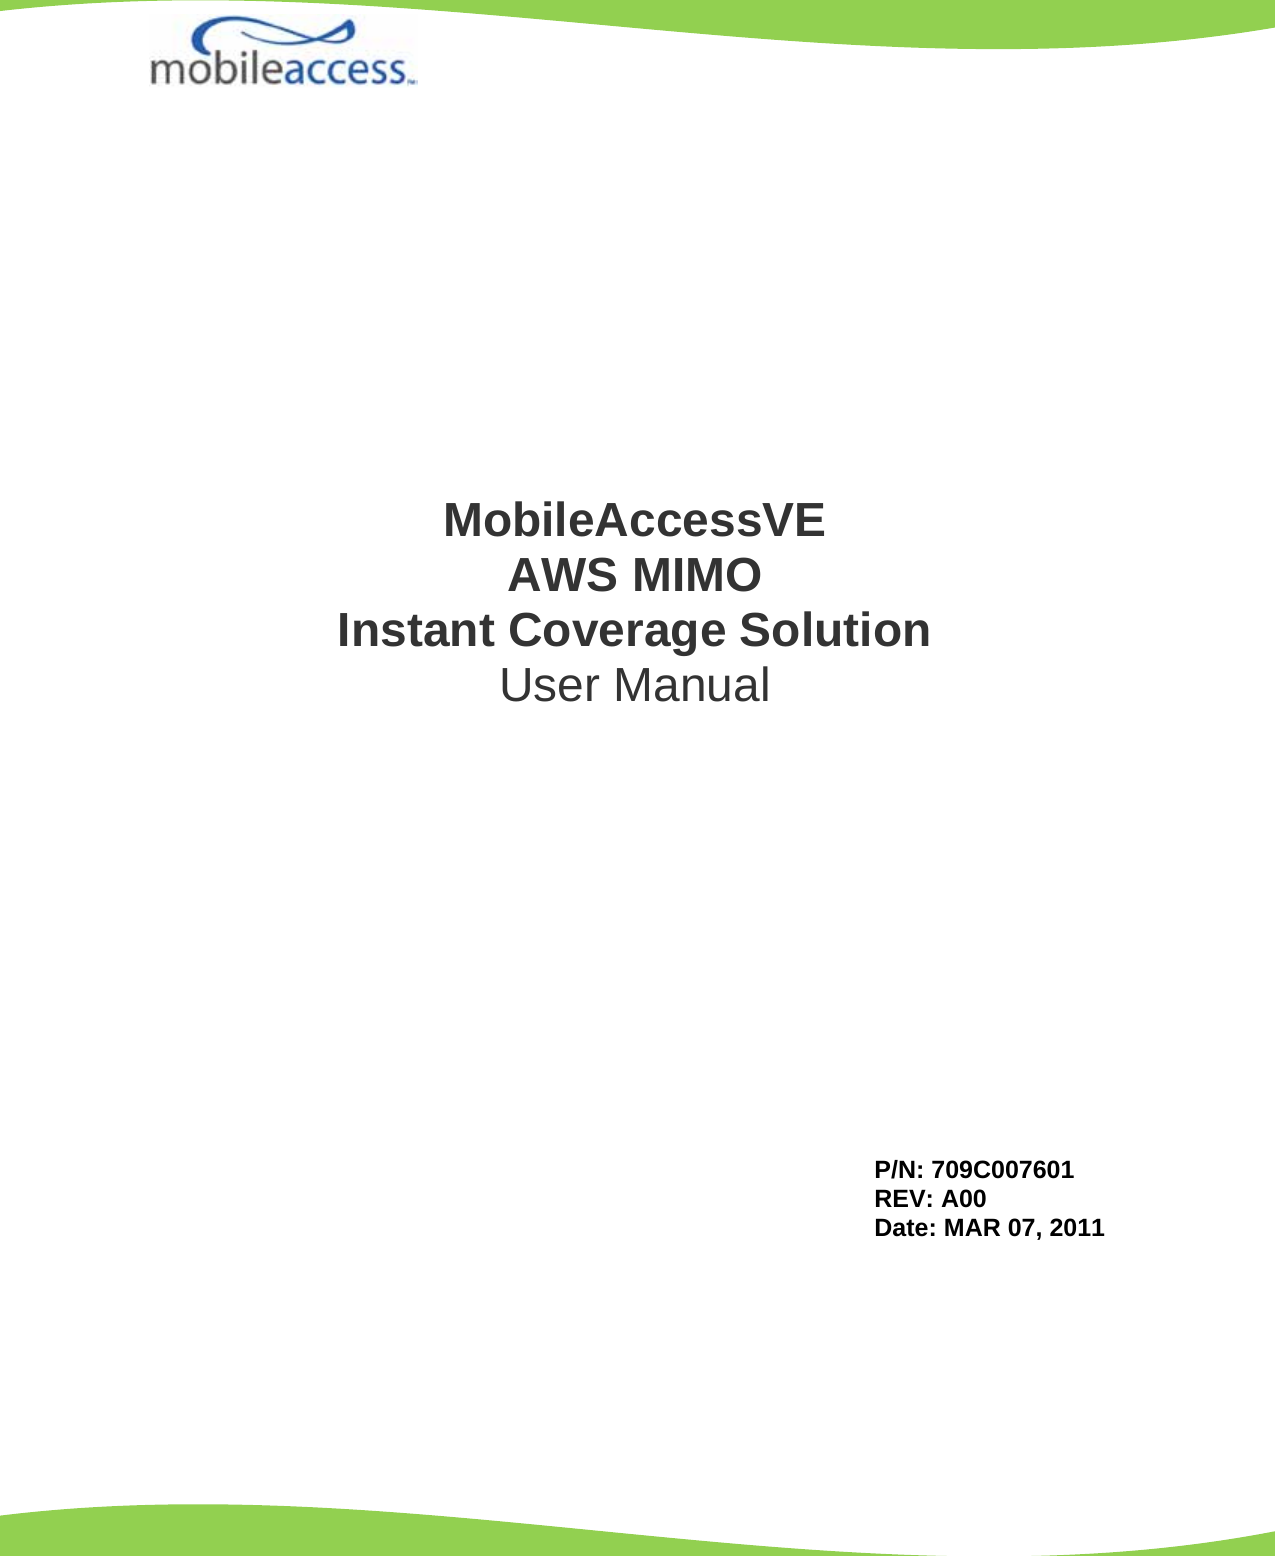                           MobileAccessVE  AWS MIMO Instant Coverage Solution User Manual P/N: 709C007601 REV: A00 Date: MAR 07, 2011 